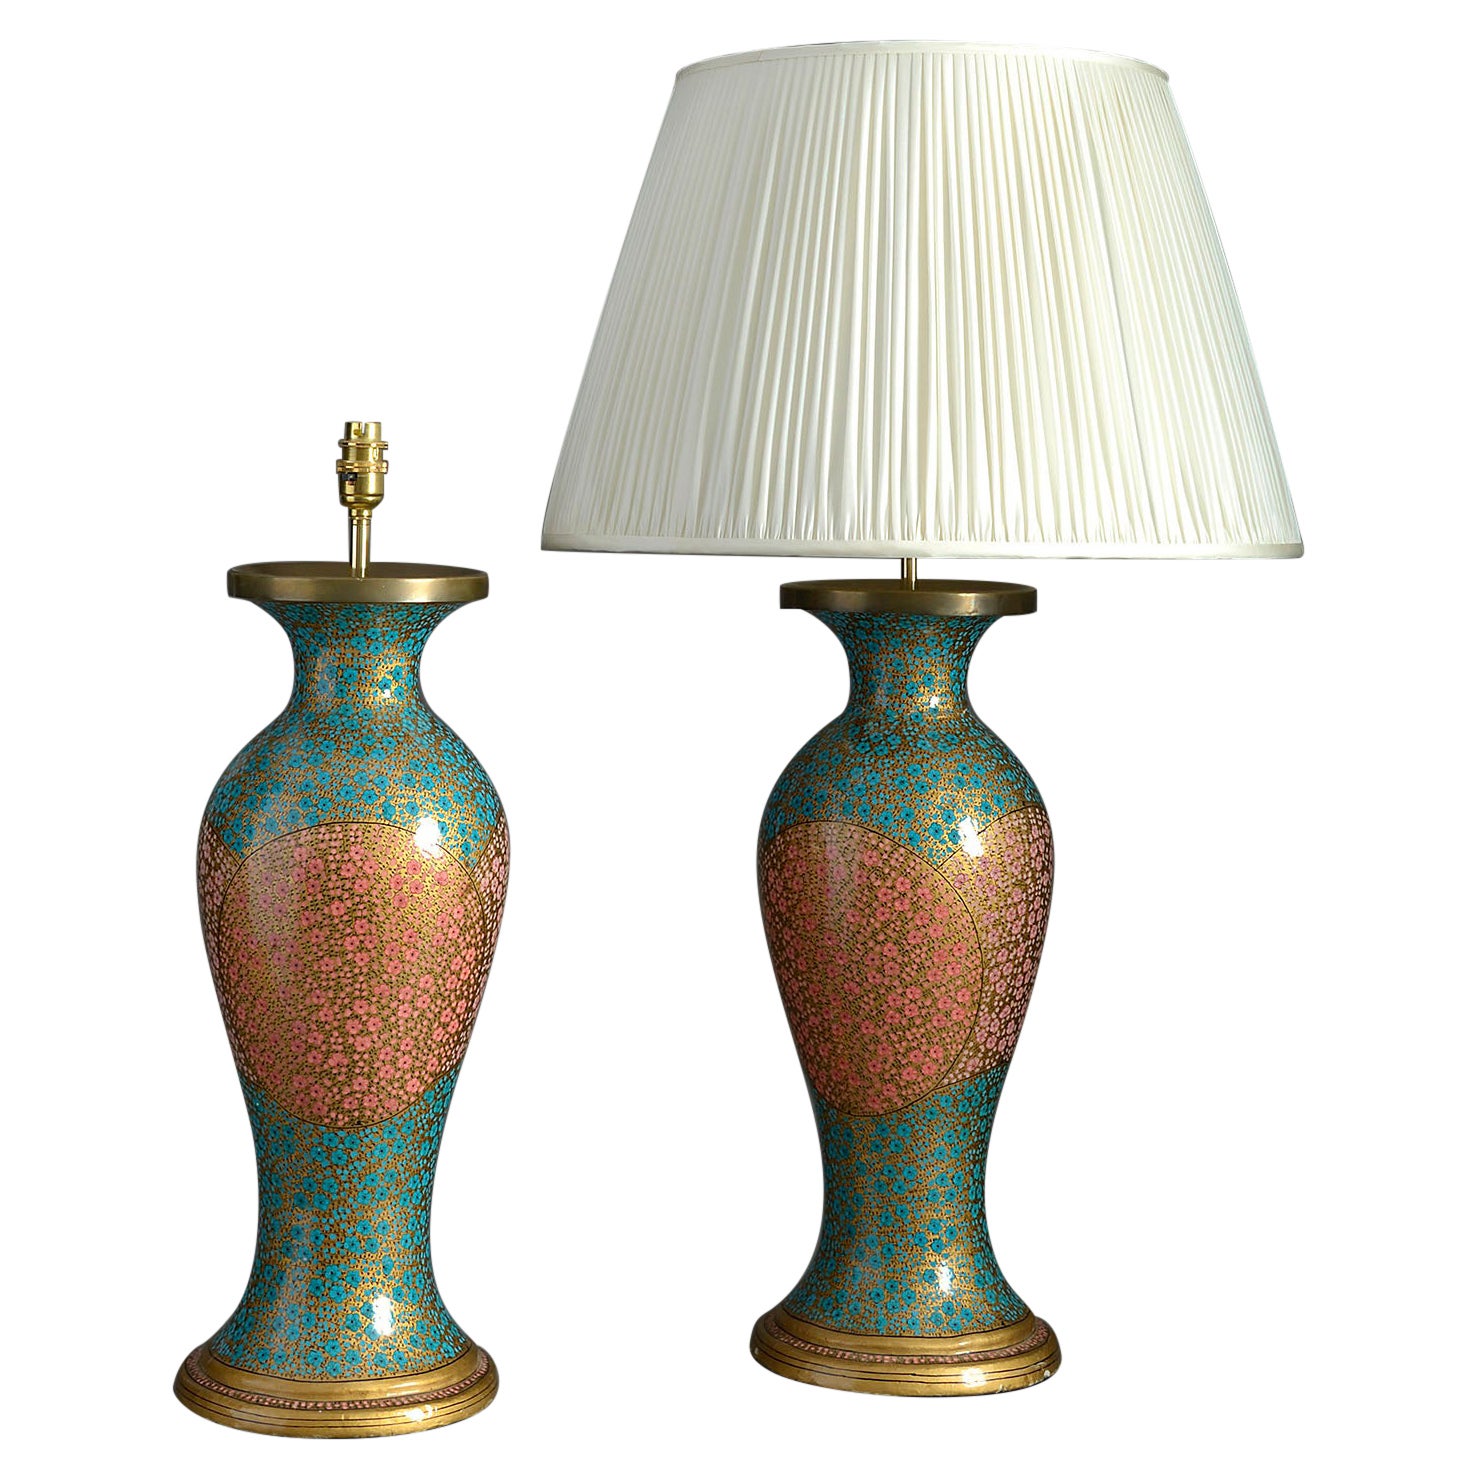 Large Pair of Early 20th Century Kashmiri Lamps